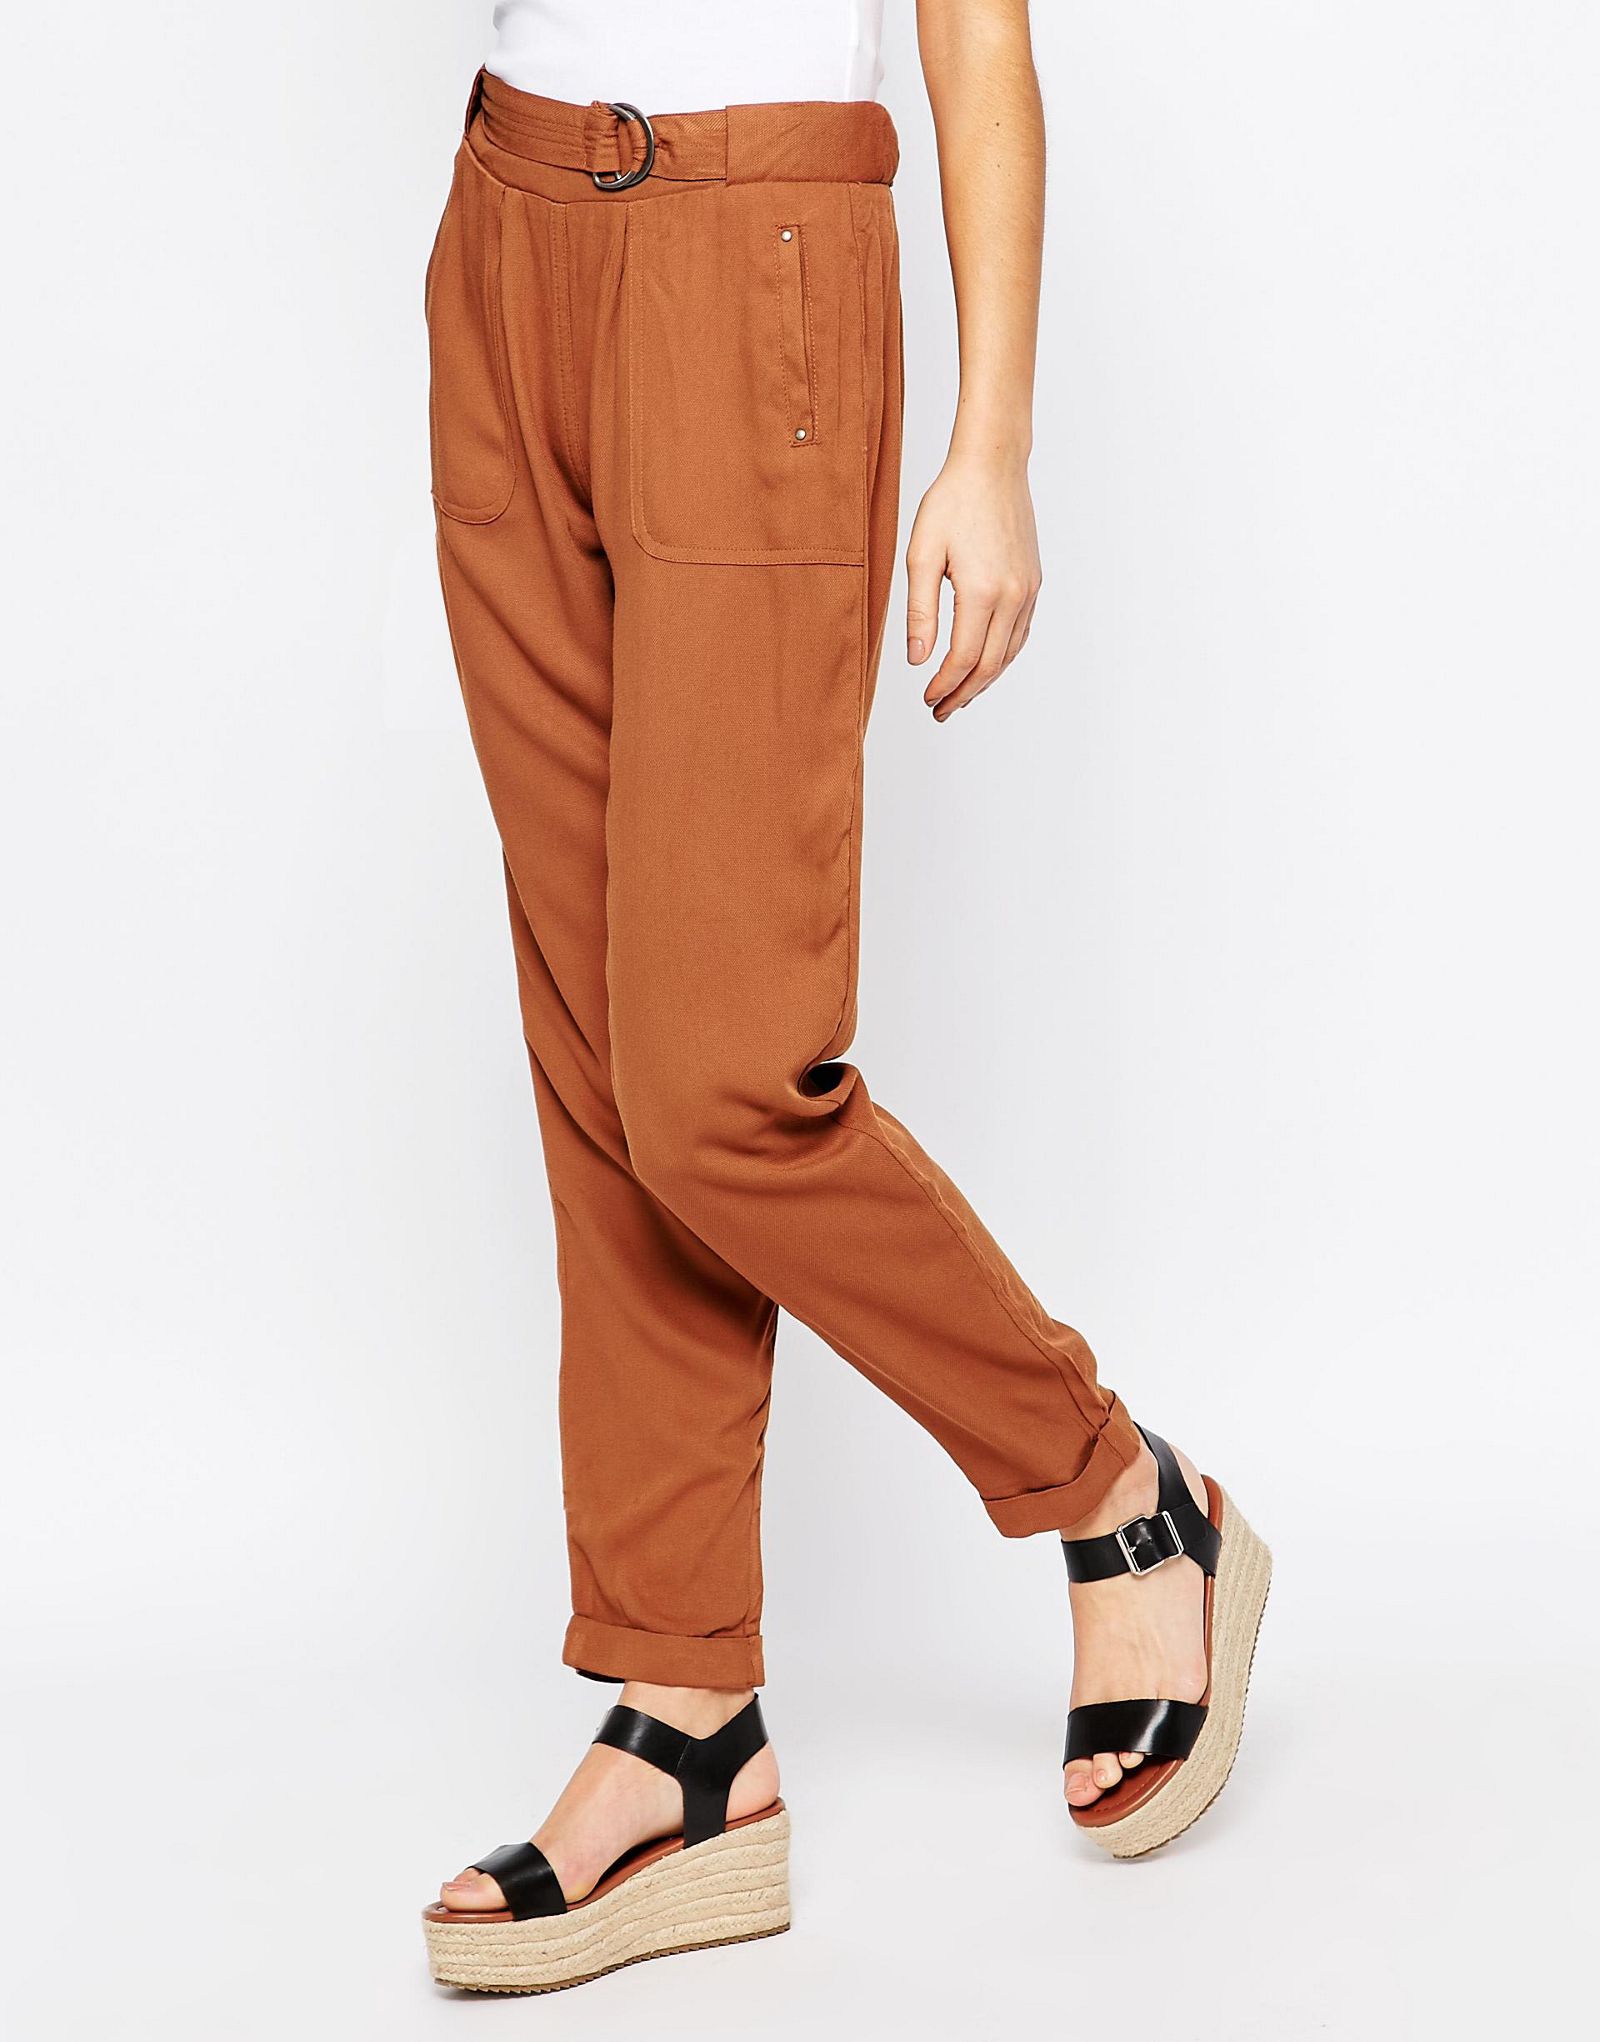 New Look Twill Peg Trousers